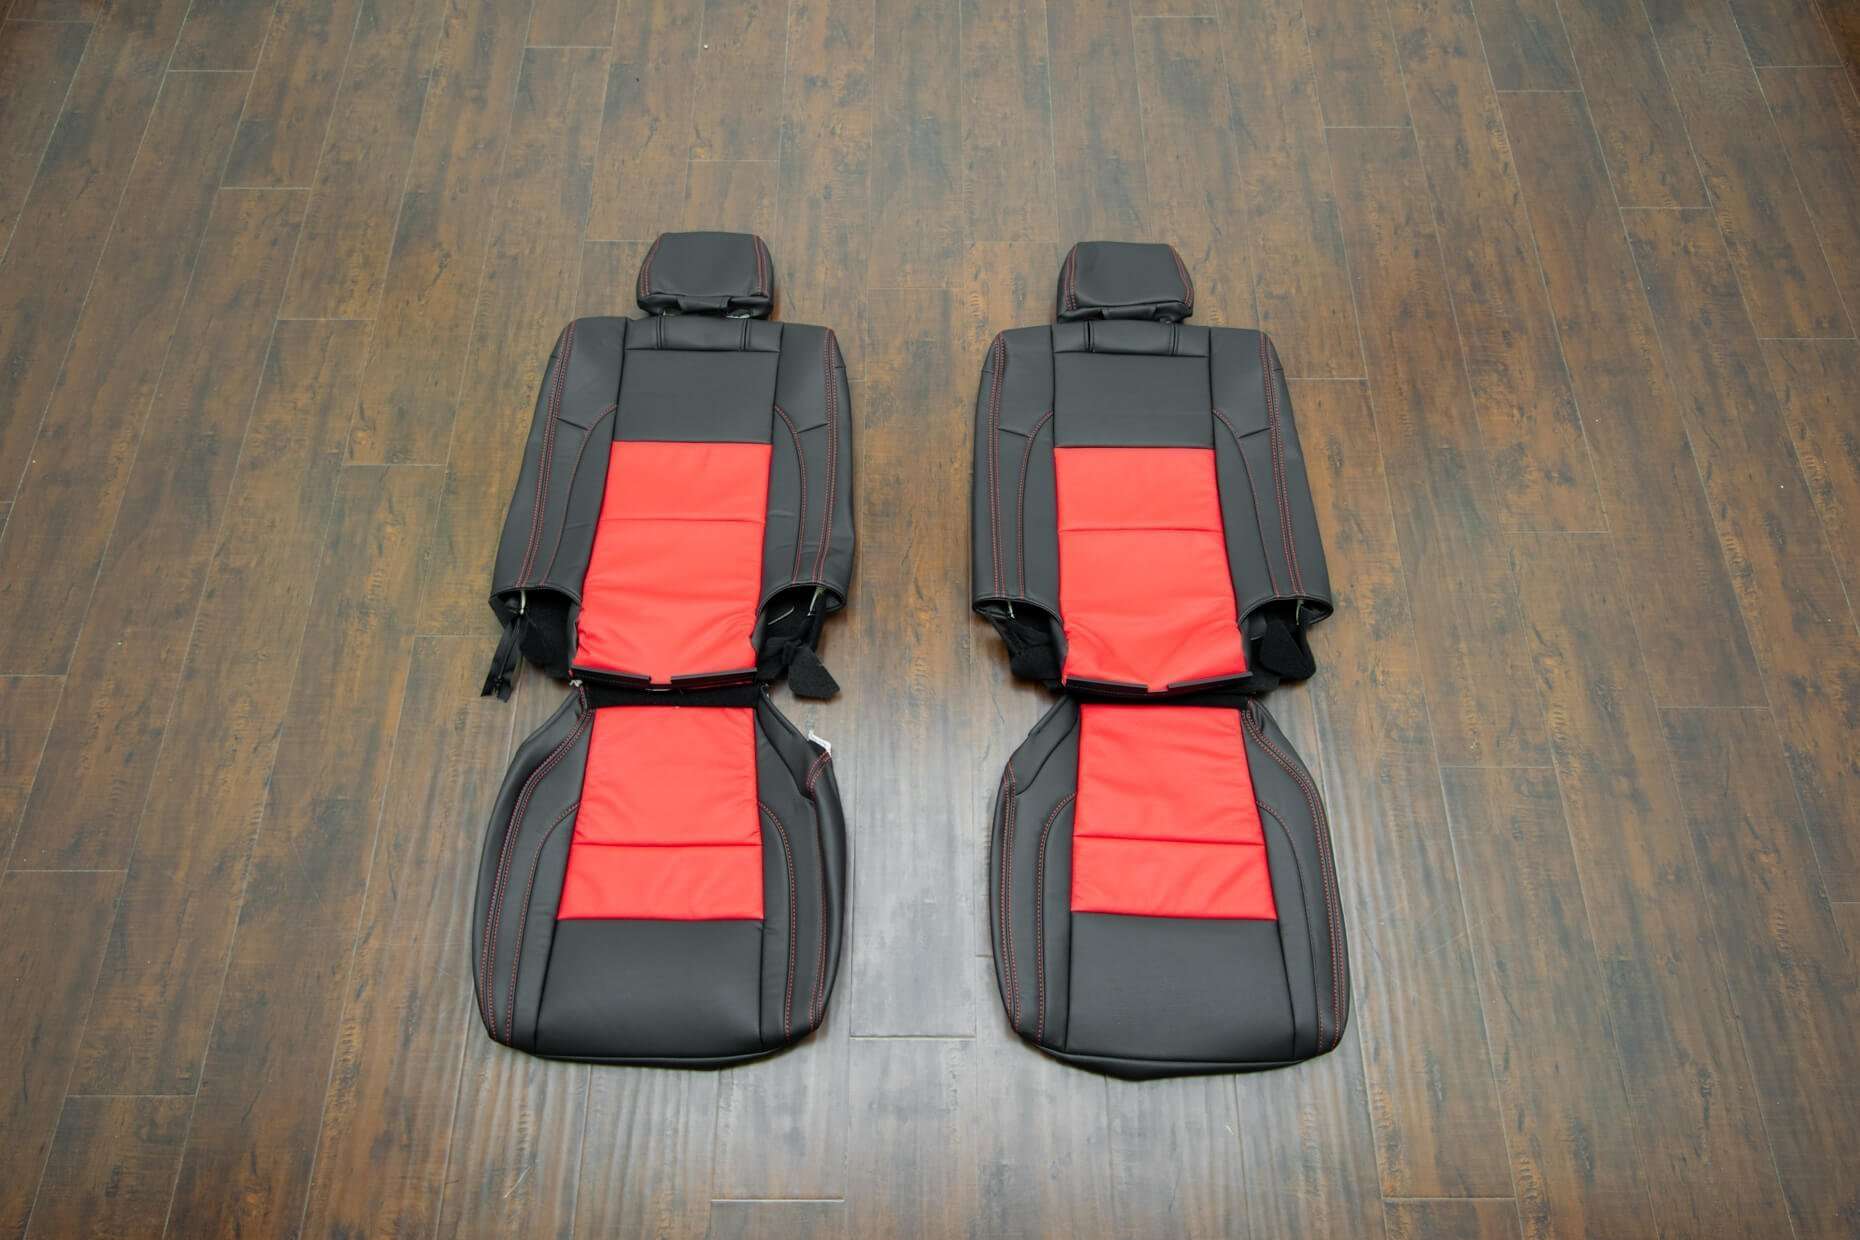 2011-2018 Dodge Durango Upholstery Kit- Black & Bright Red - Front seats